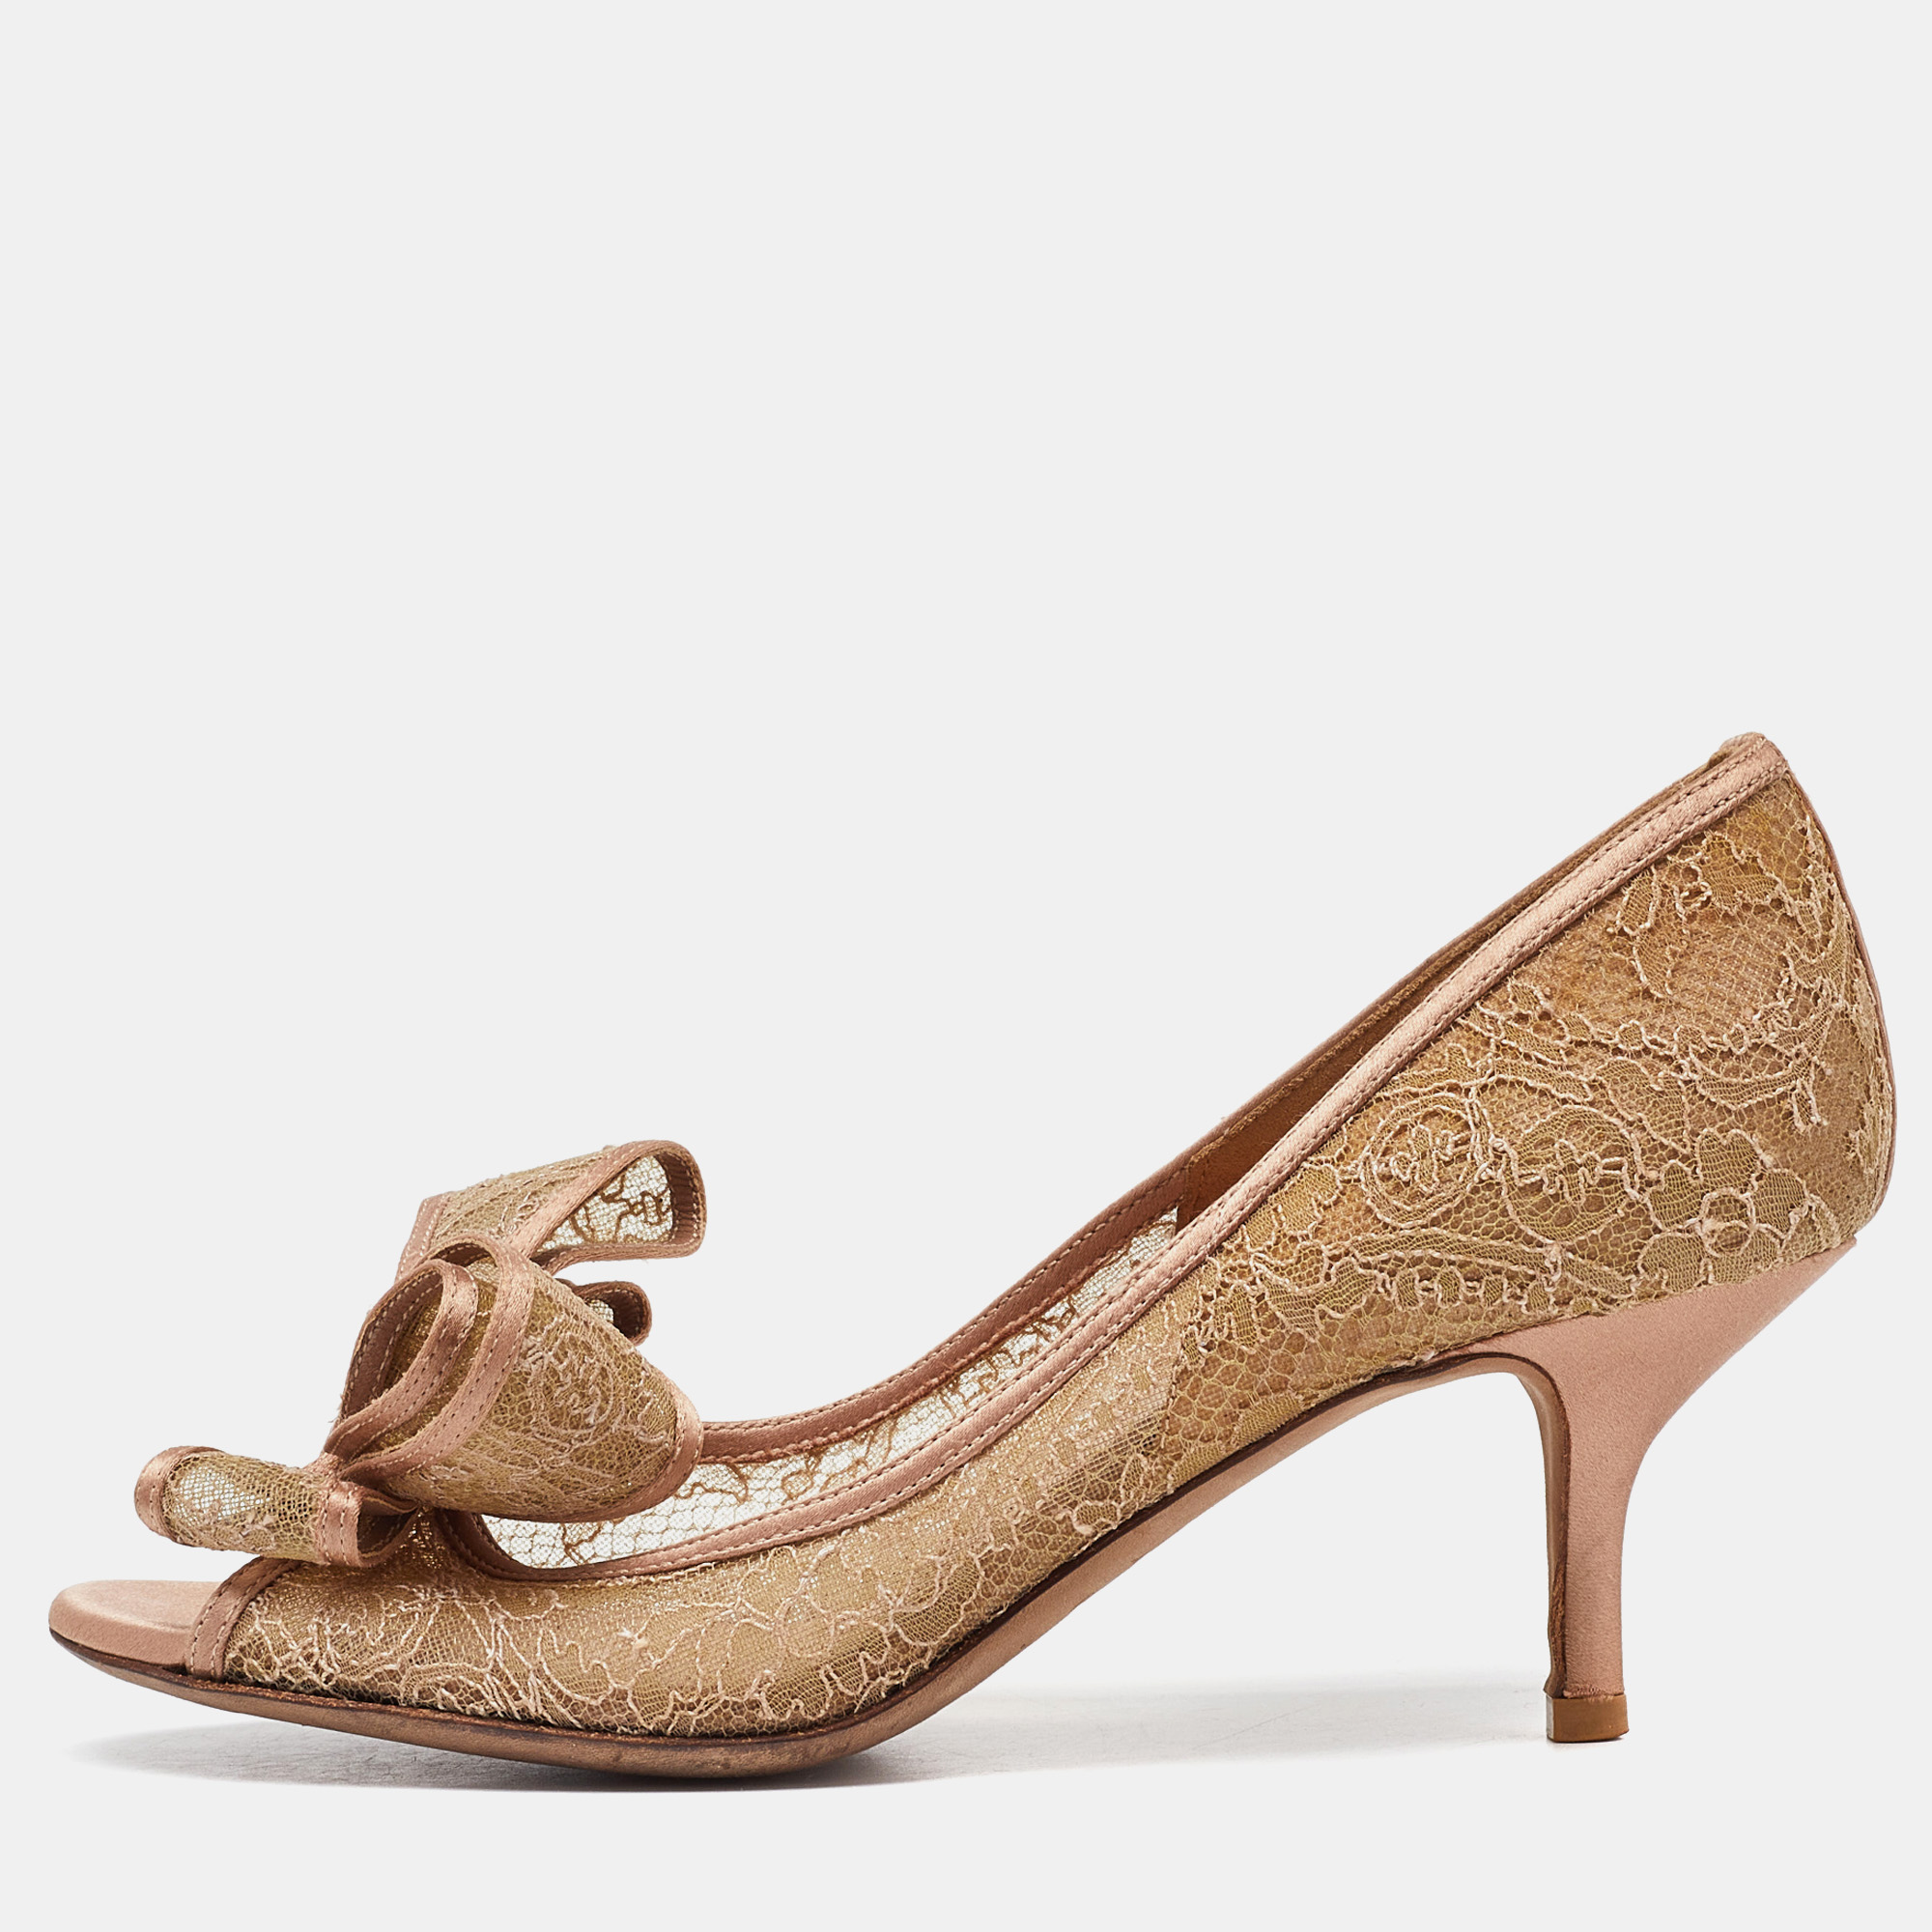 Valentino beige satin and lace bow peep toe pumps size 36